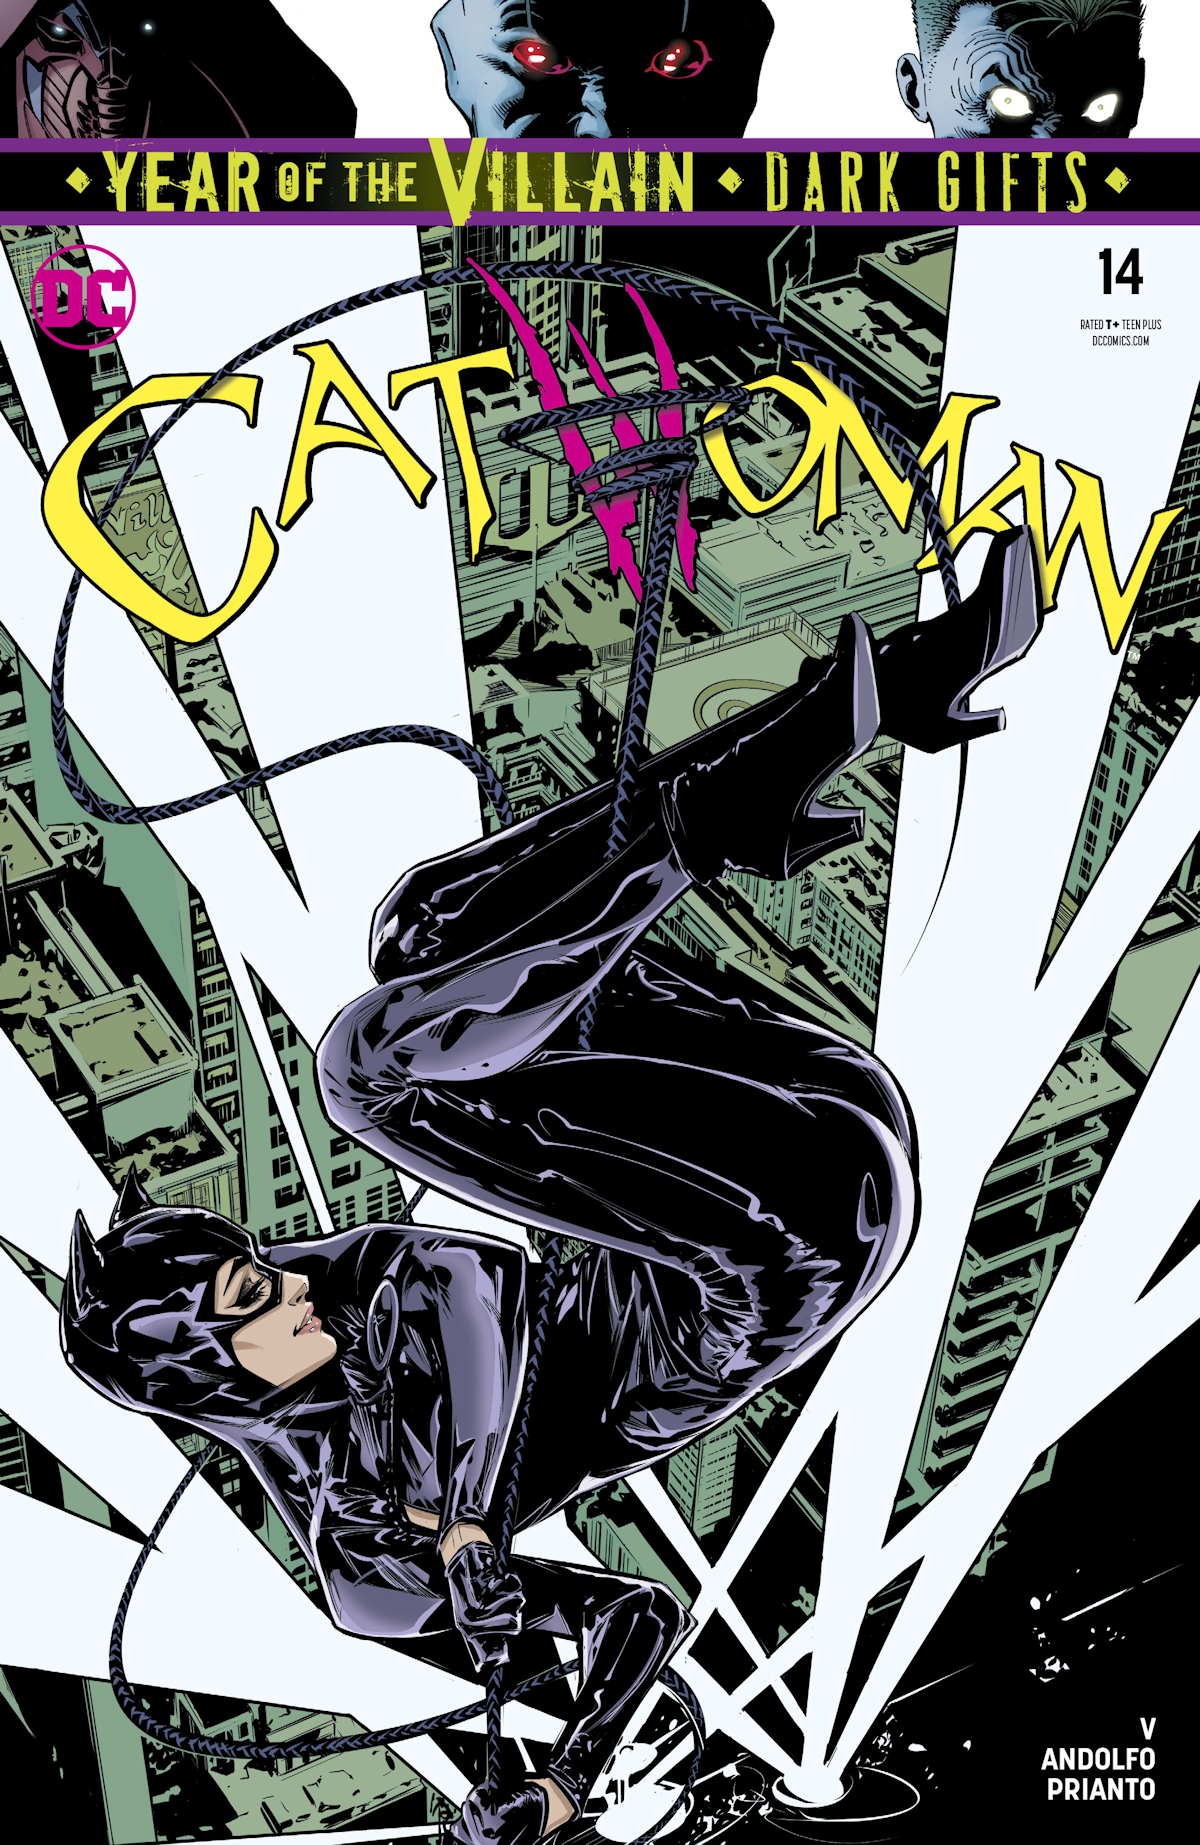 Catwoman Vol. 5 14 (Cover A)